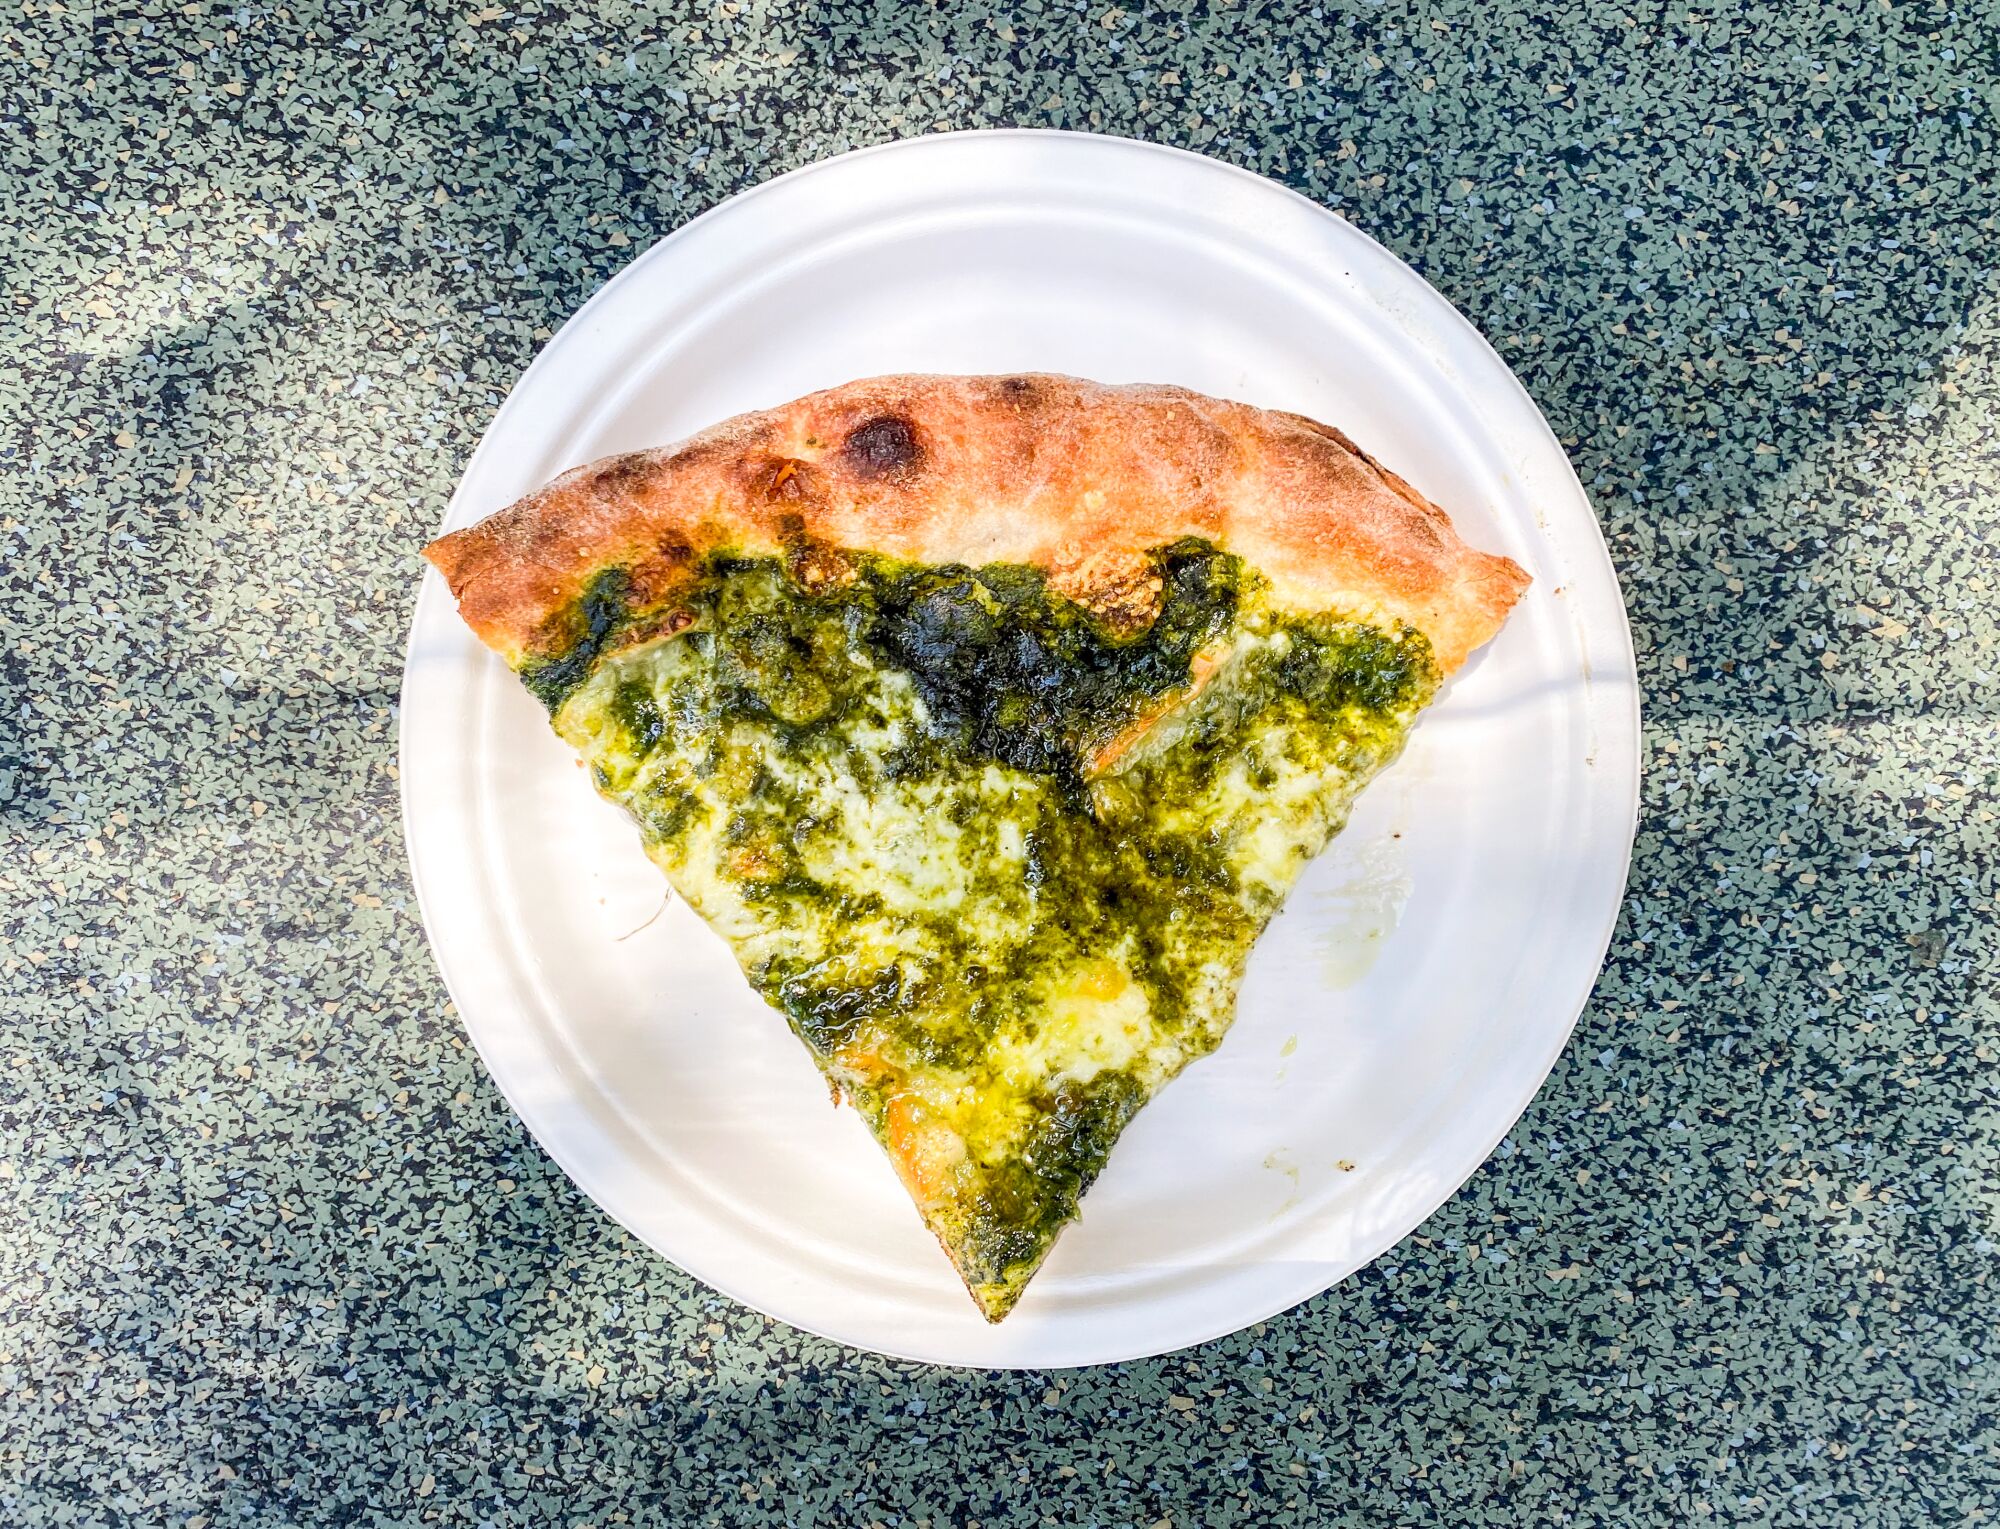 A green slice at Pizzeria Bianco at ROW DTLA in the Arts District.